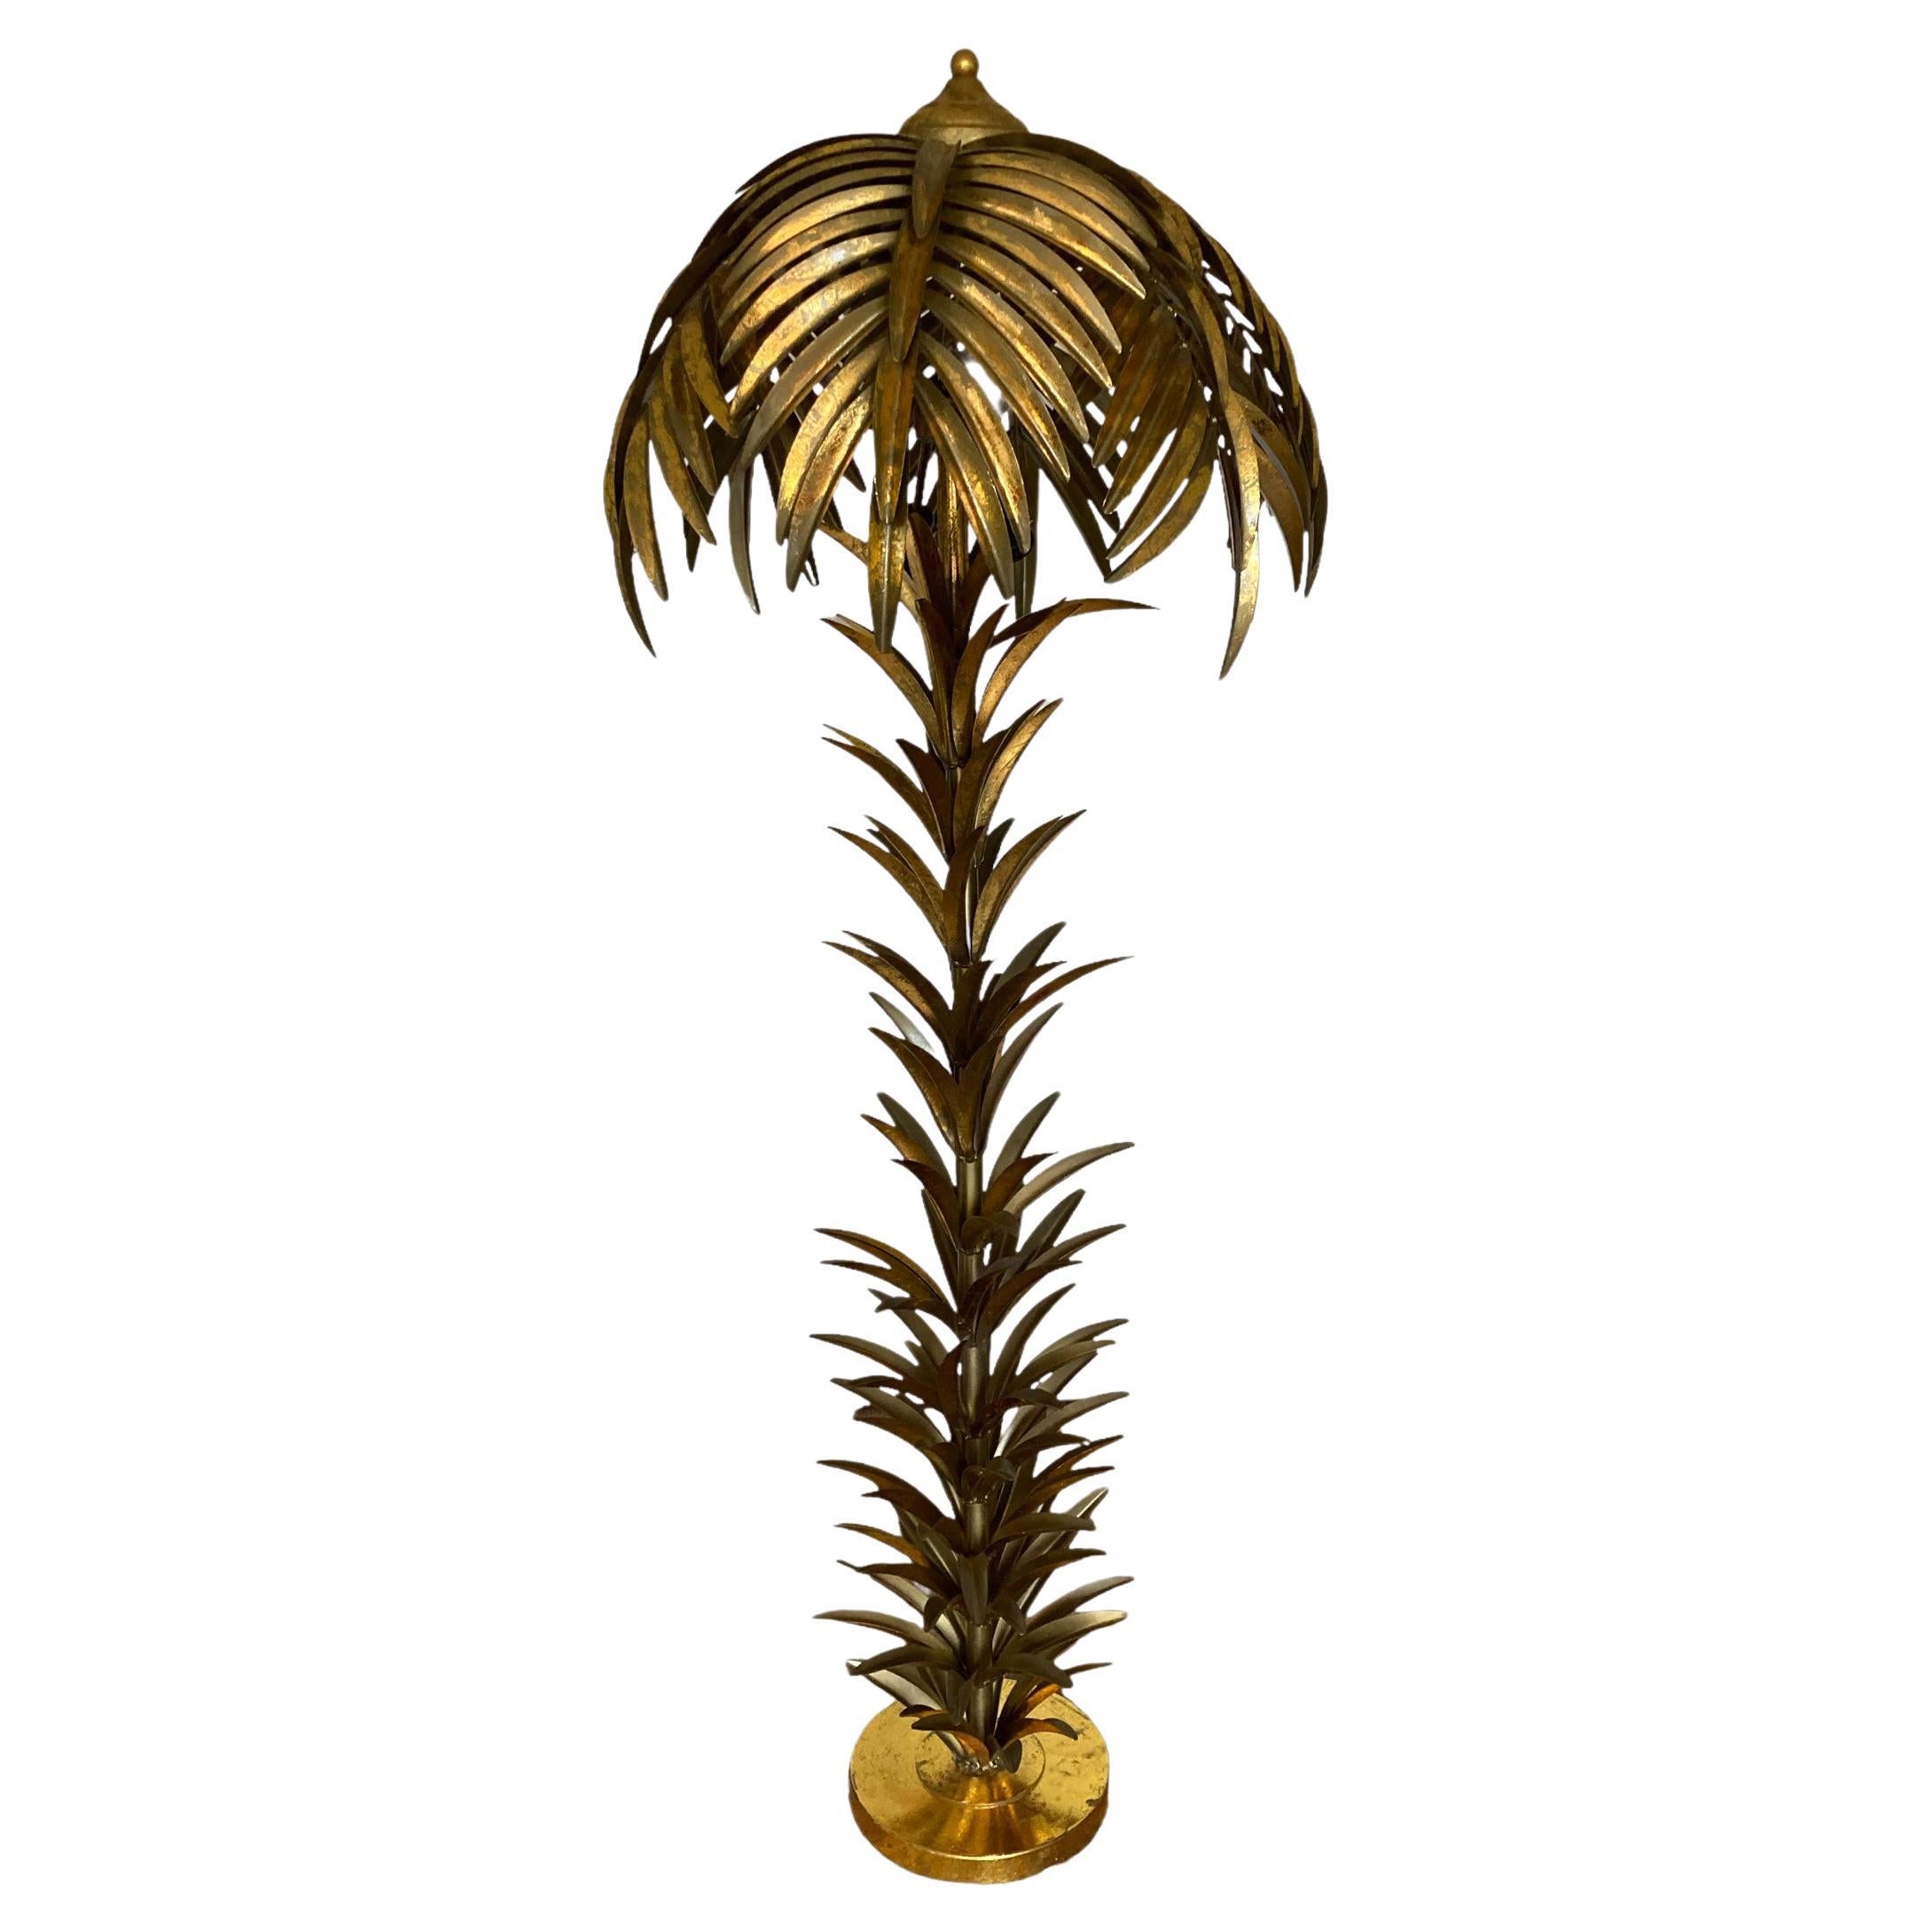 Hollywood Regency Style Gilt Metal Palm Tree Floor Lamp, Mid to late 20C For Sale